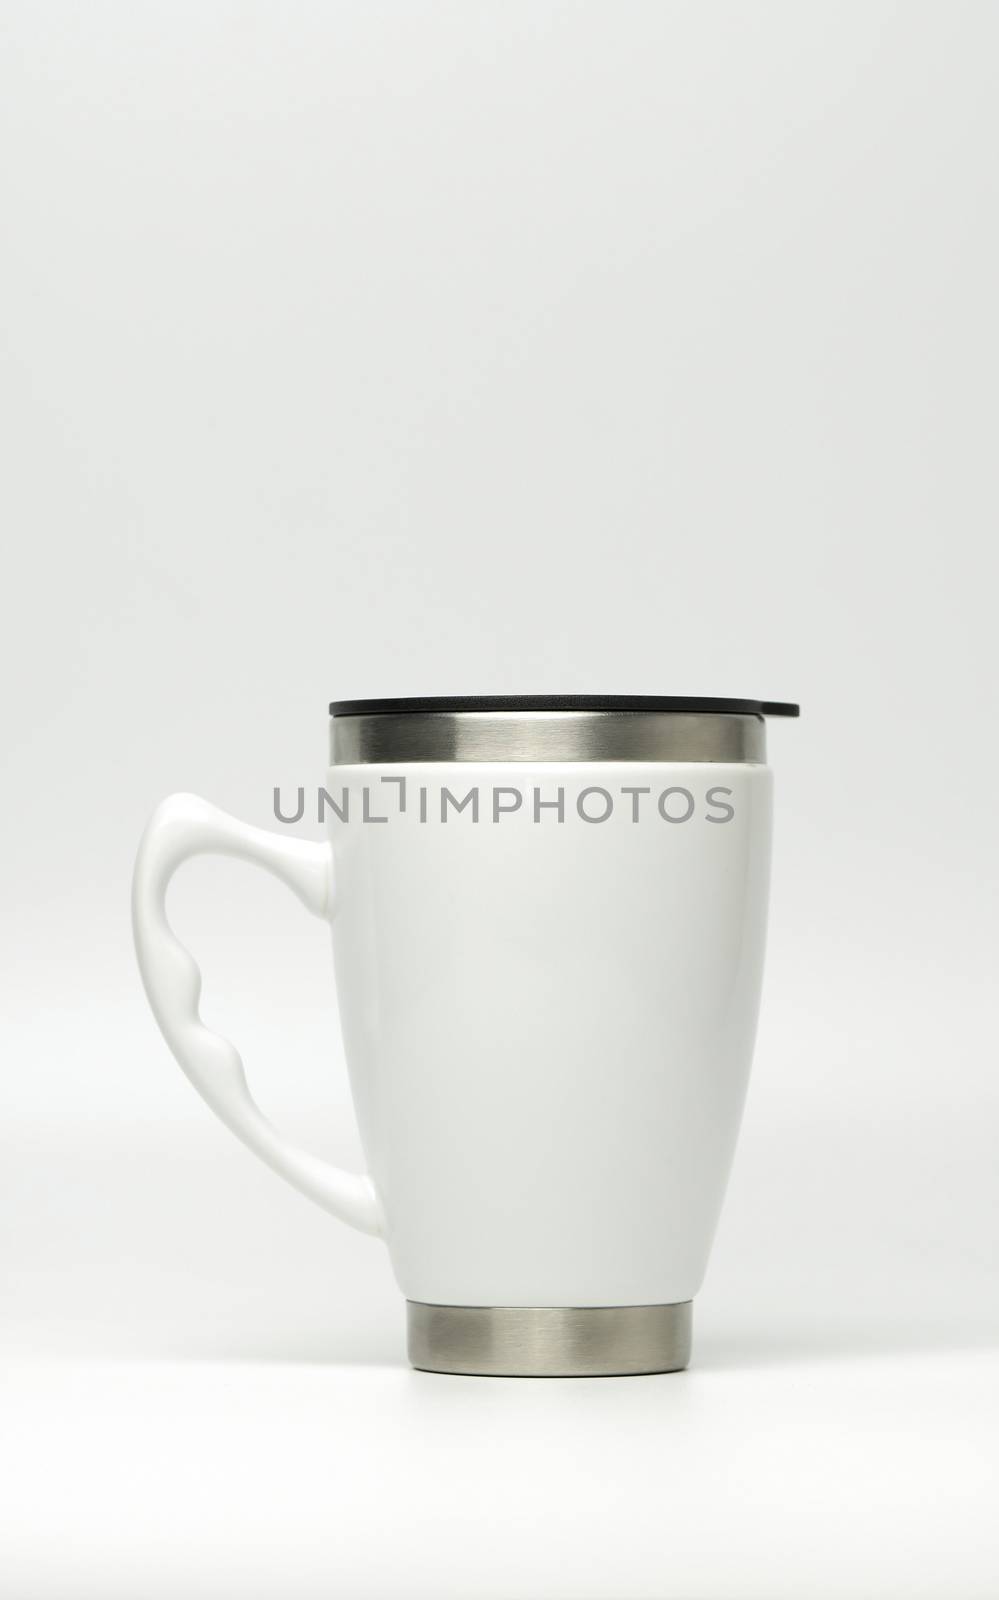 Thermos bottle on white background with copy space, just add your own text by Fahroni